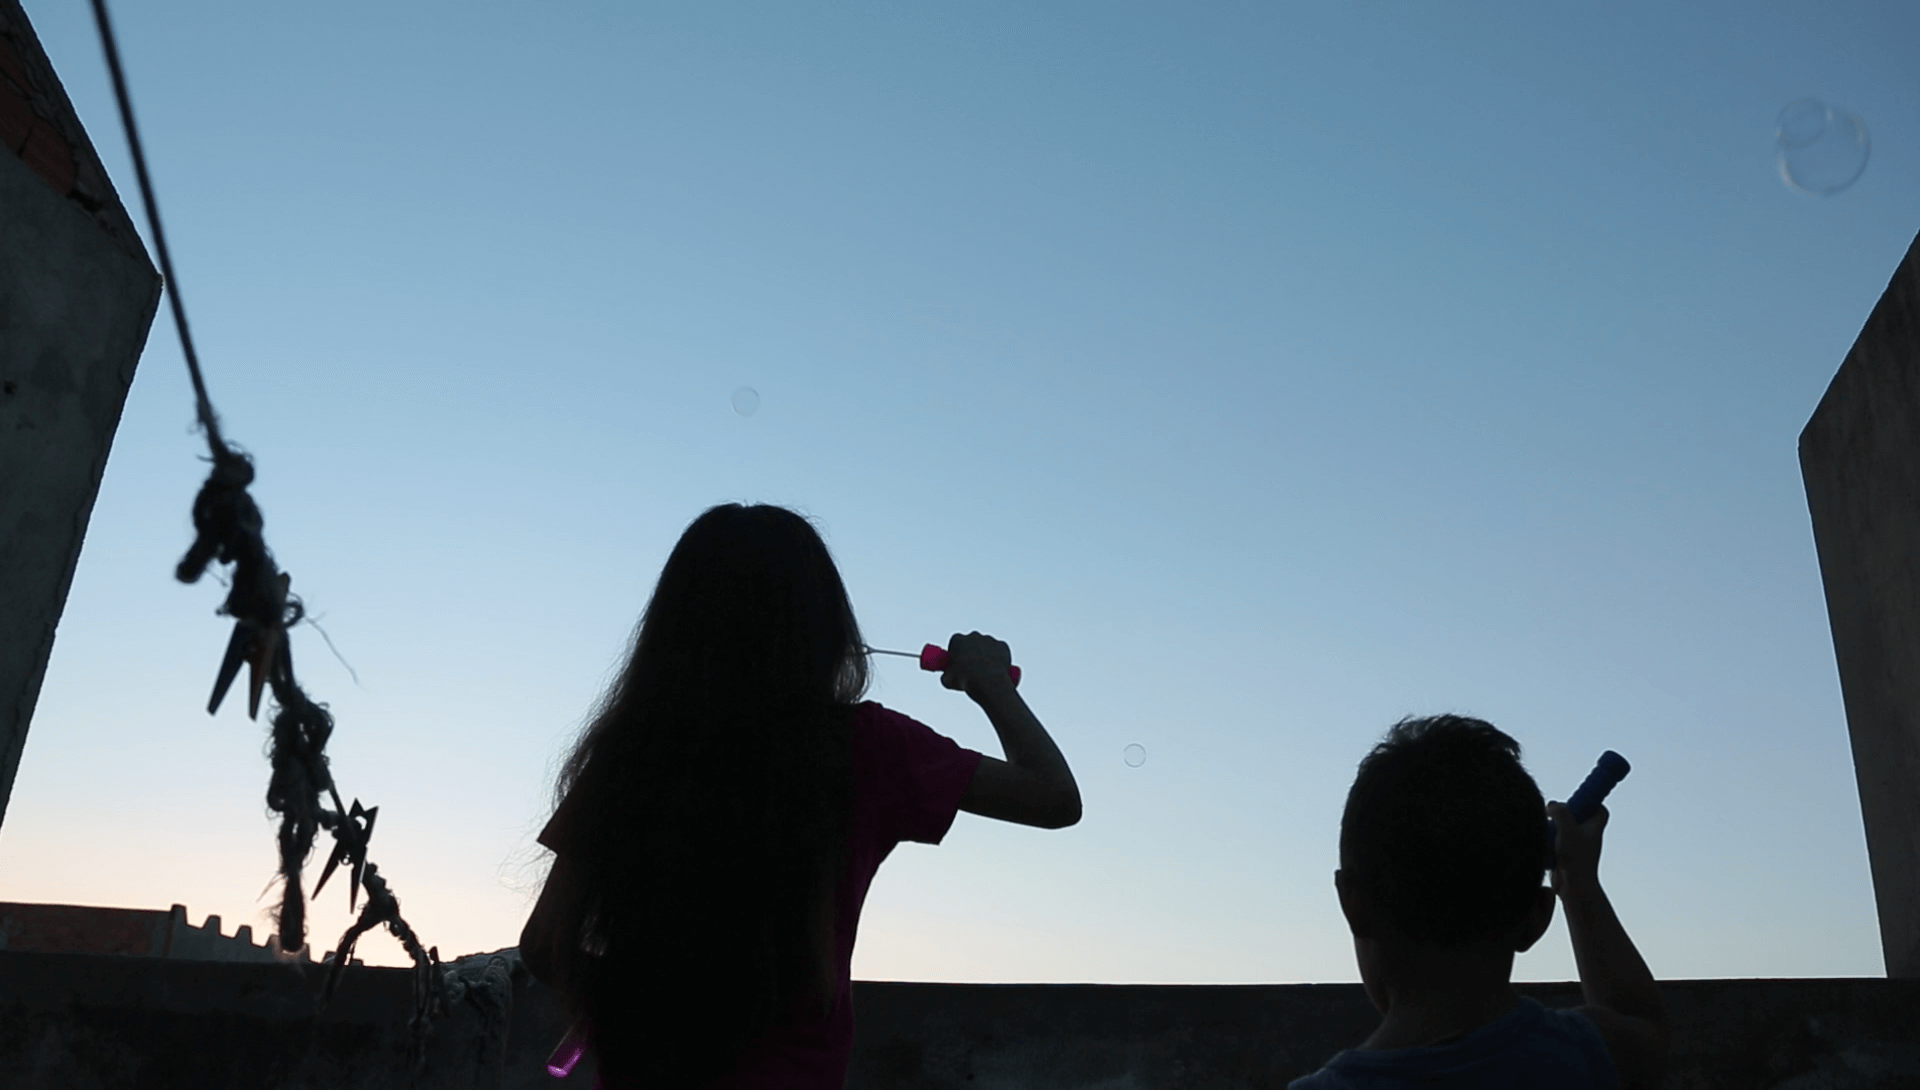 Still from Girls of the Moon. Silhouette of two children -- a girl and a boy -- blowing bubbles. They are seen from behind, the sky is light blue and goes to yellow closer to the horizon, as if it is sunrise or sunset.